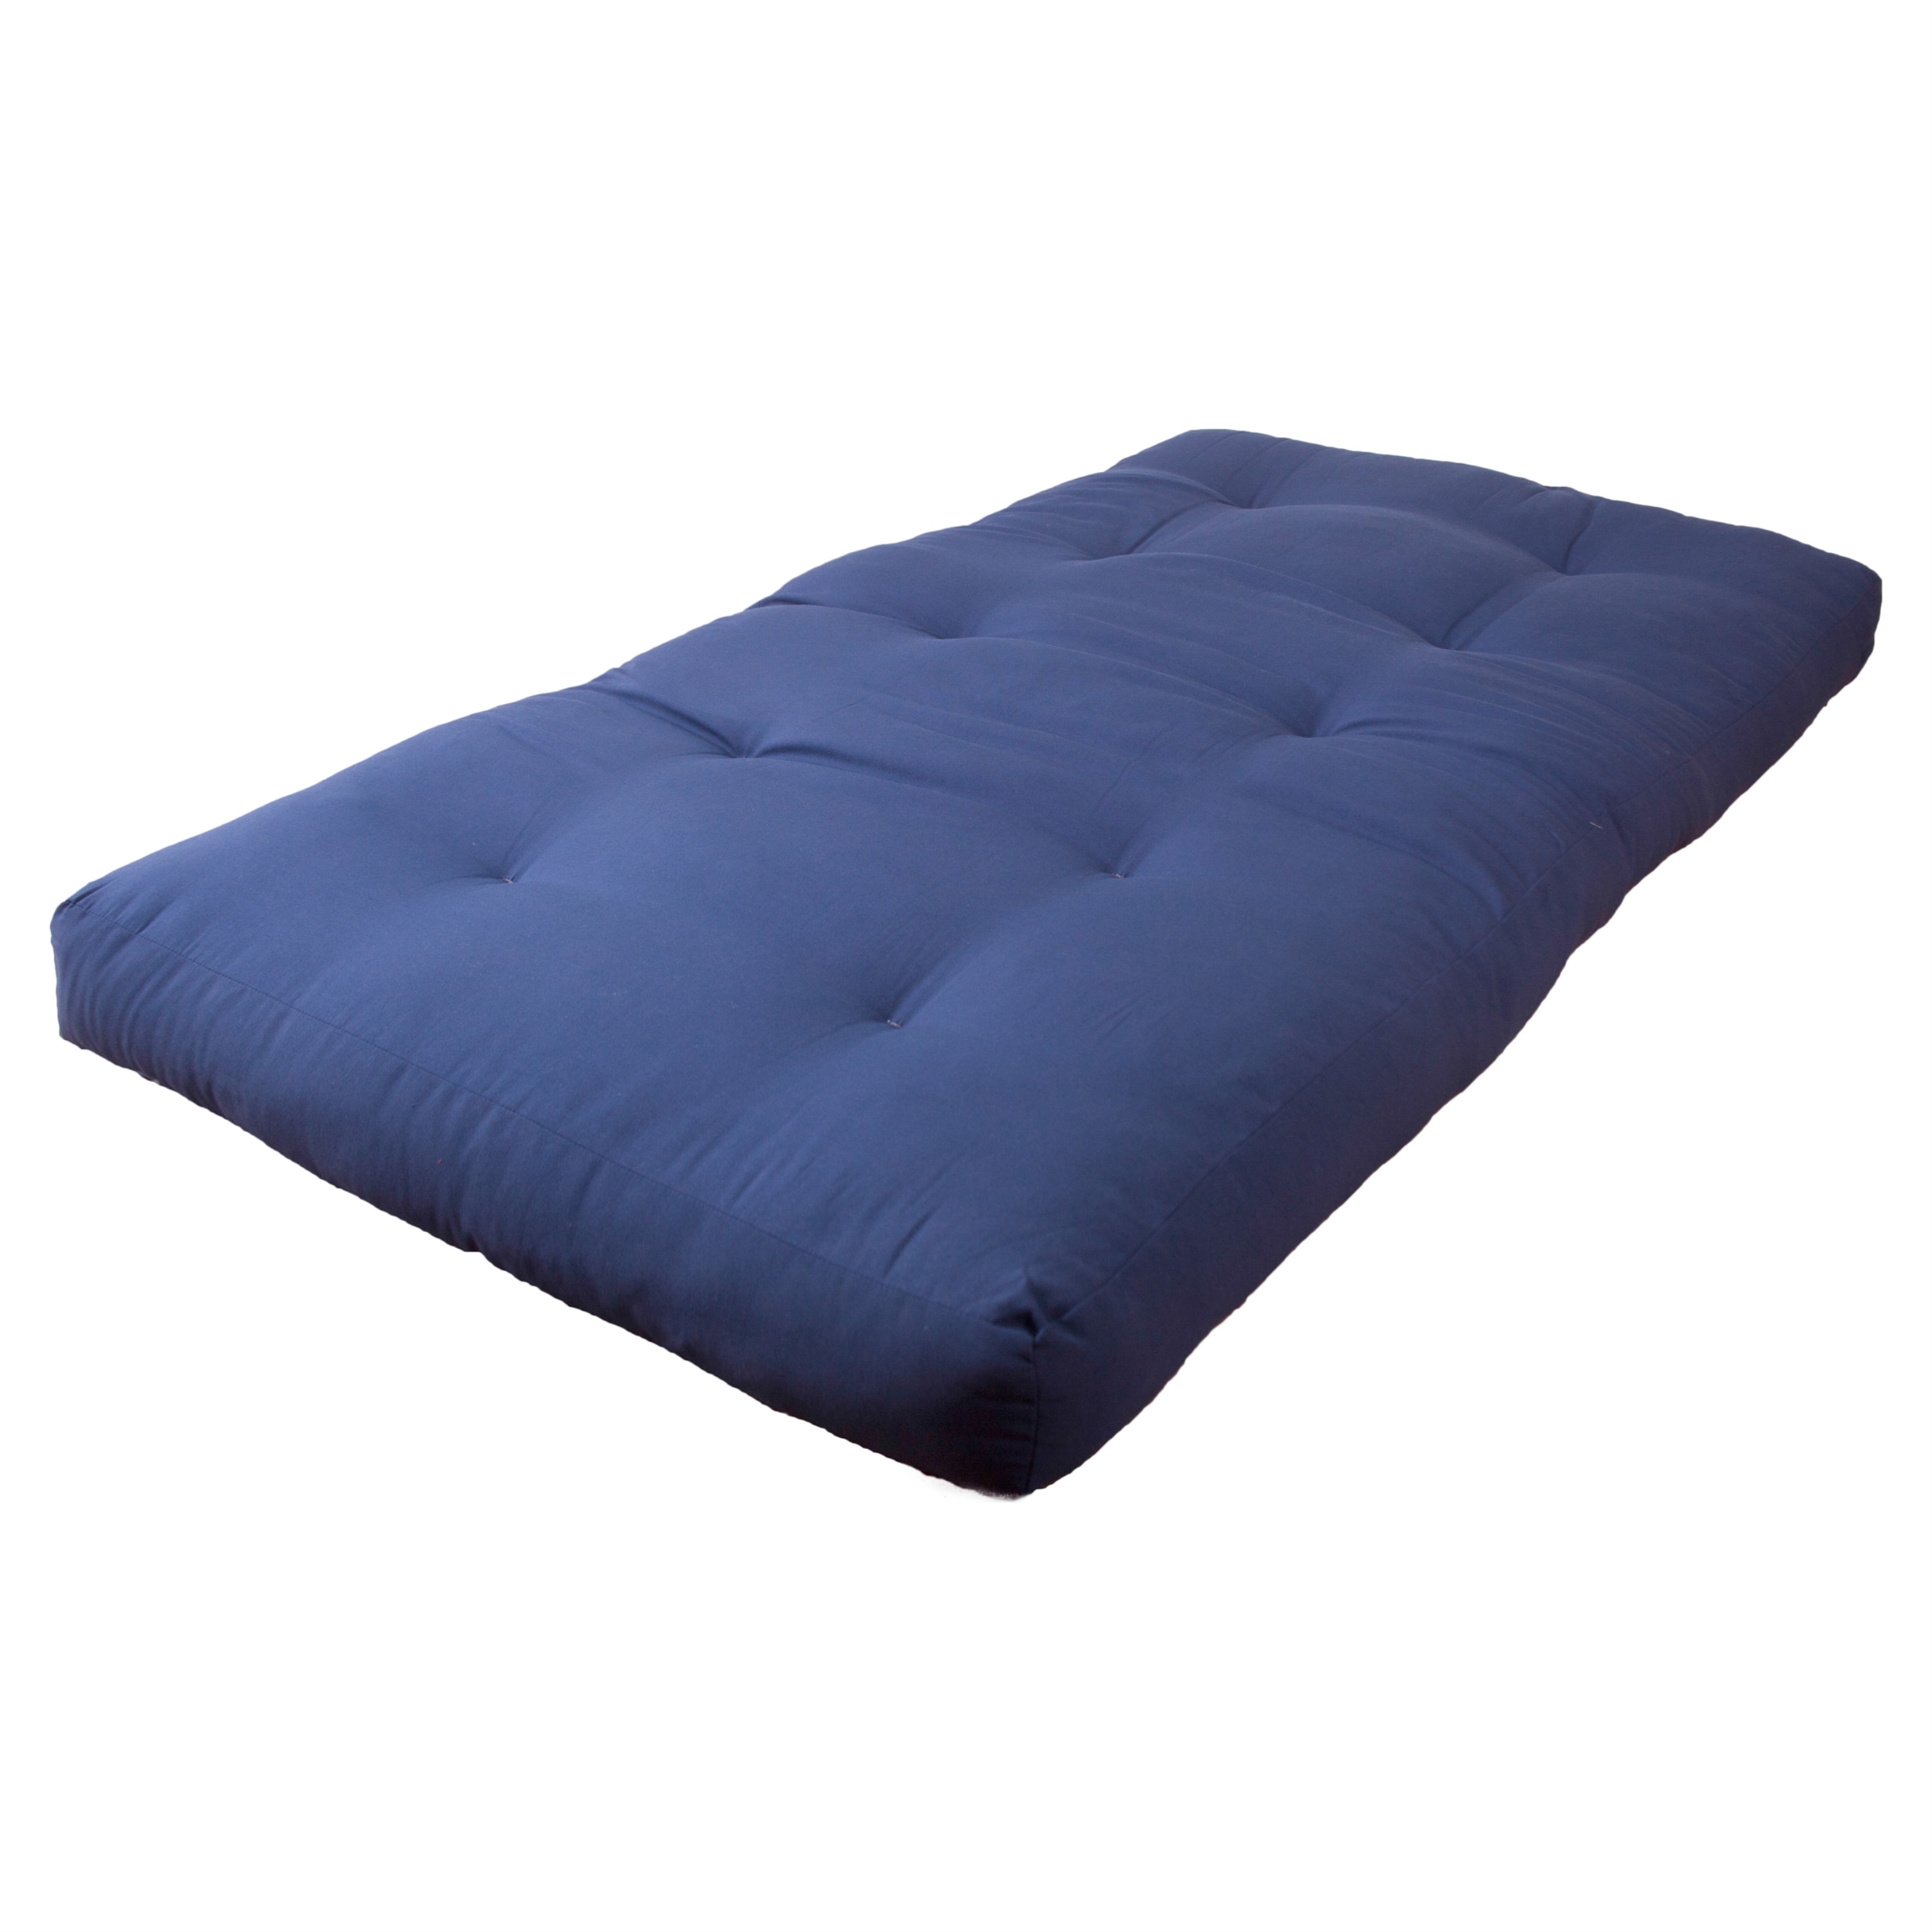 6-inch Thick Twill Futon Mattress (twin  Full  Or Queen)